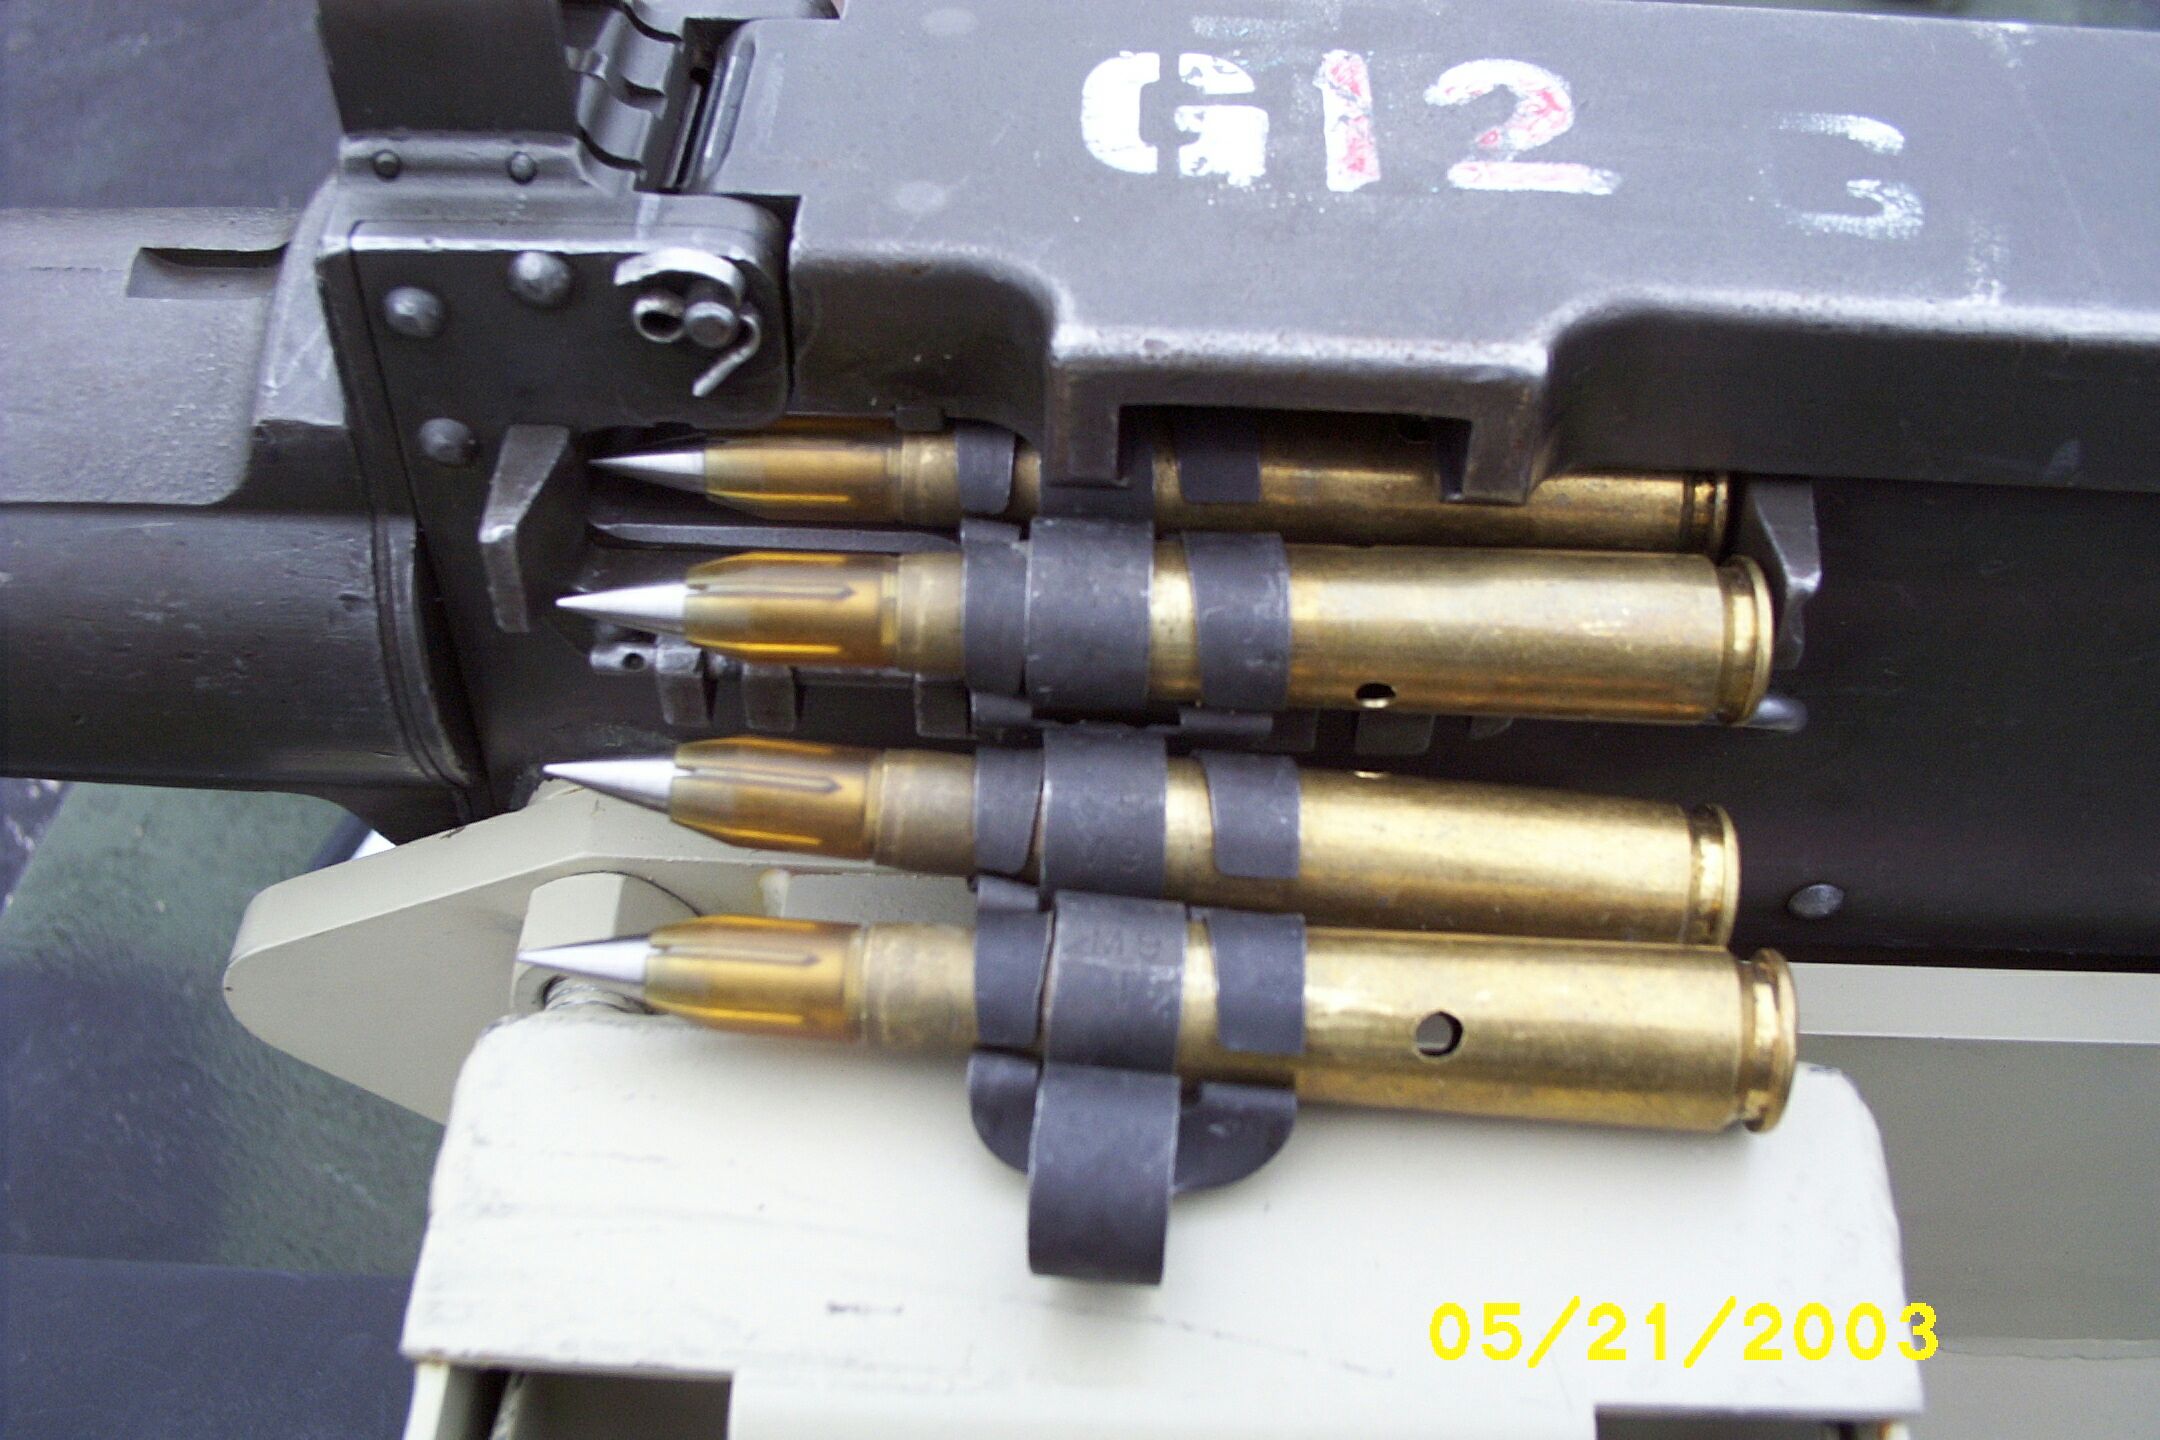 Left to right: Mk211, Spotter, Silver tip (Armor Piercing Incendiary), Blue ...